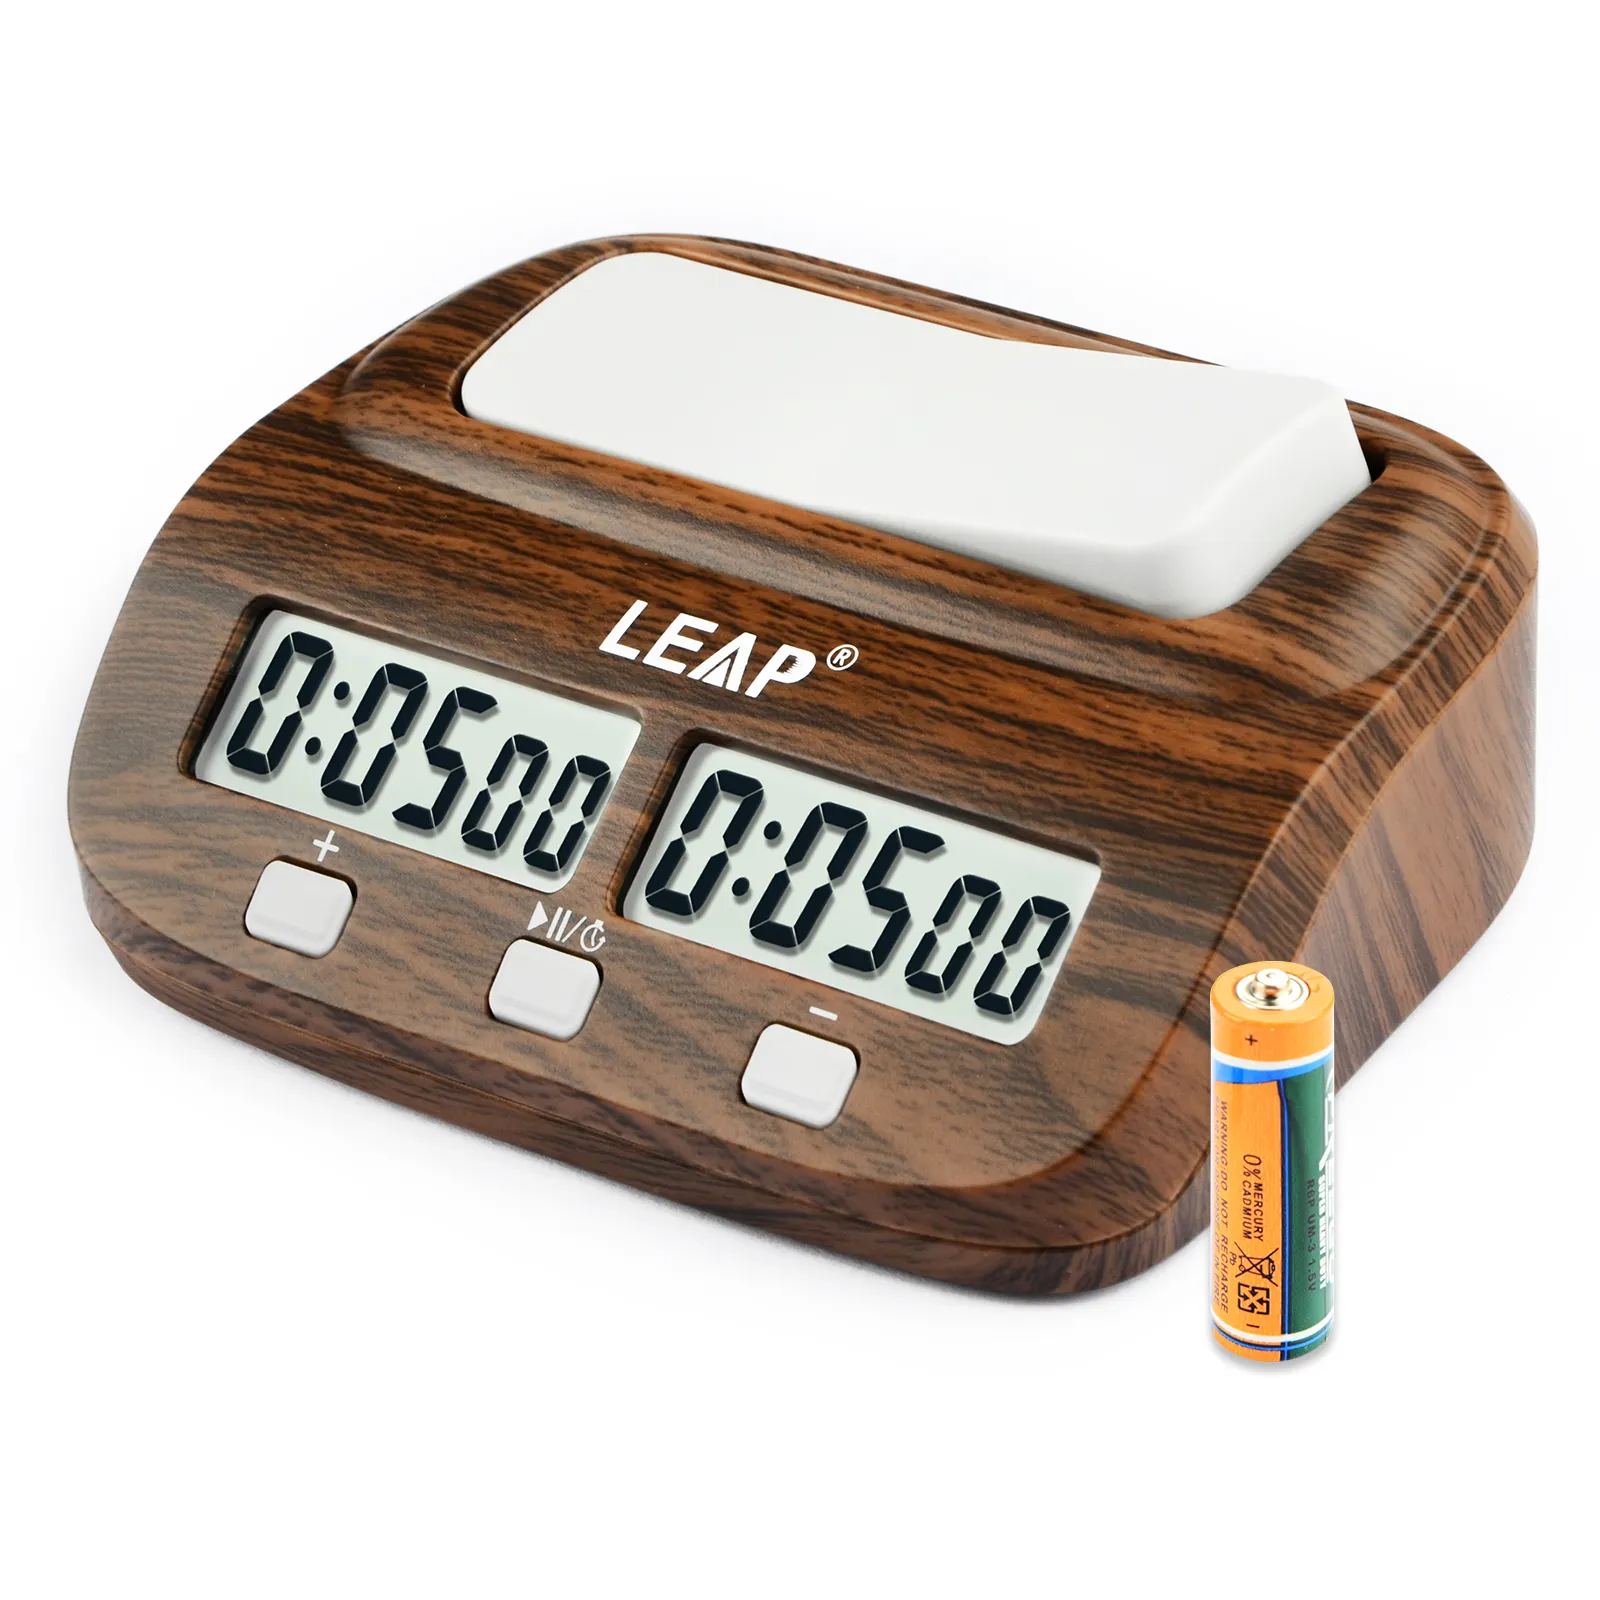 LEAP Chess Clock Digital Timer Advanced for Game and Chess Timer with Bonus  & Delay Count Down up Alarm